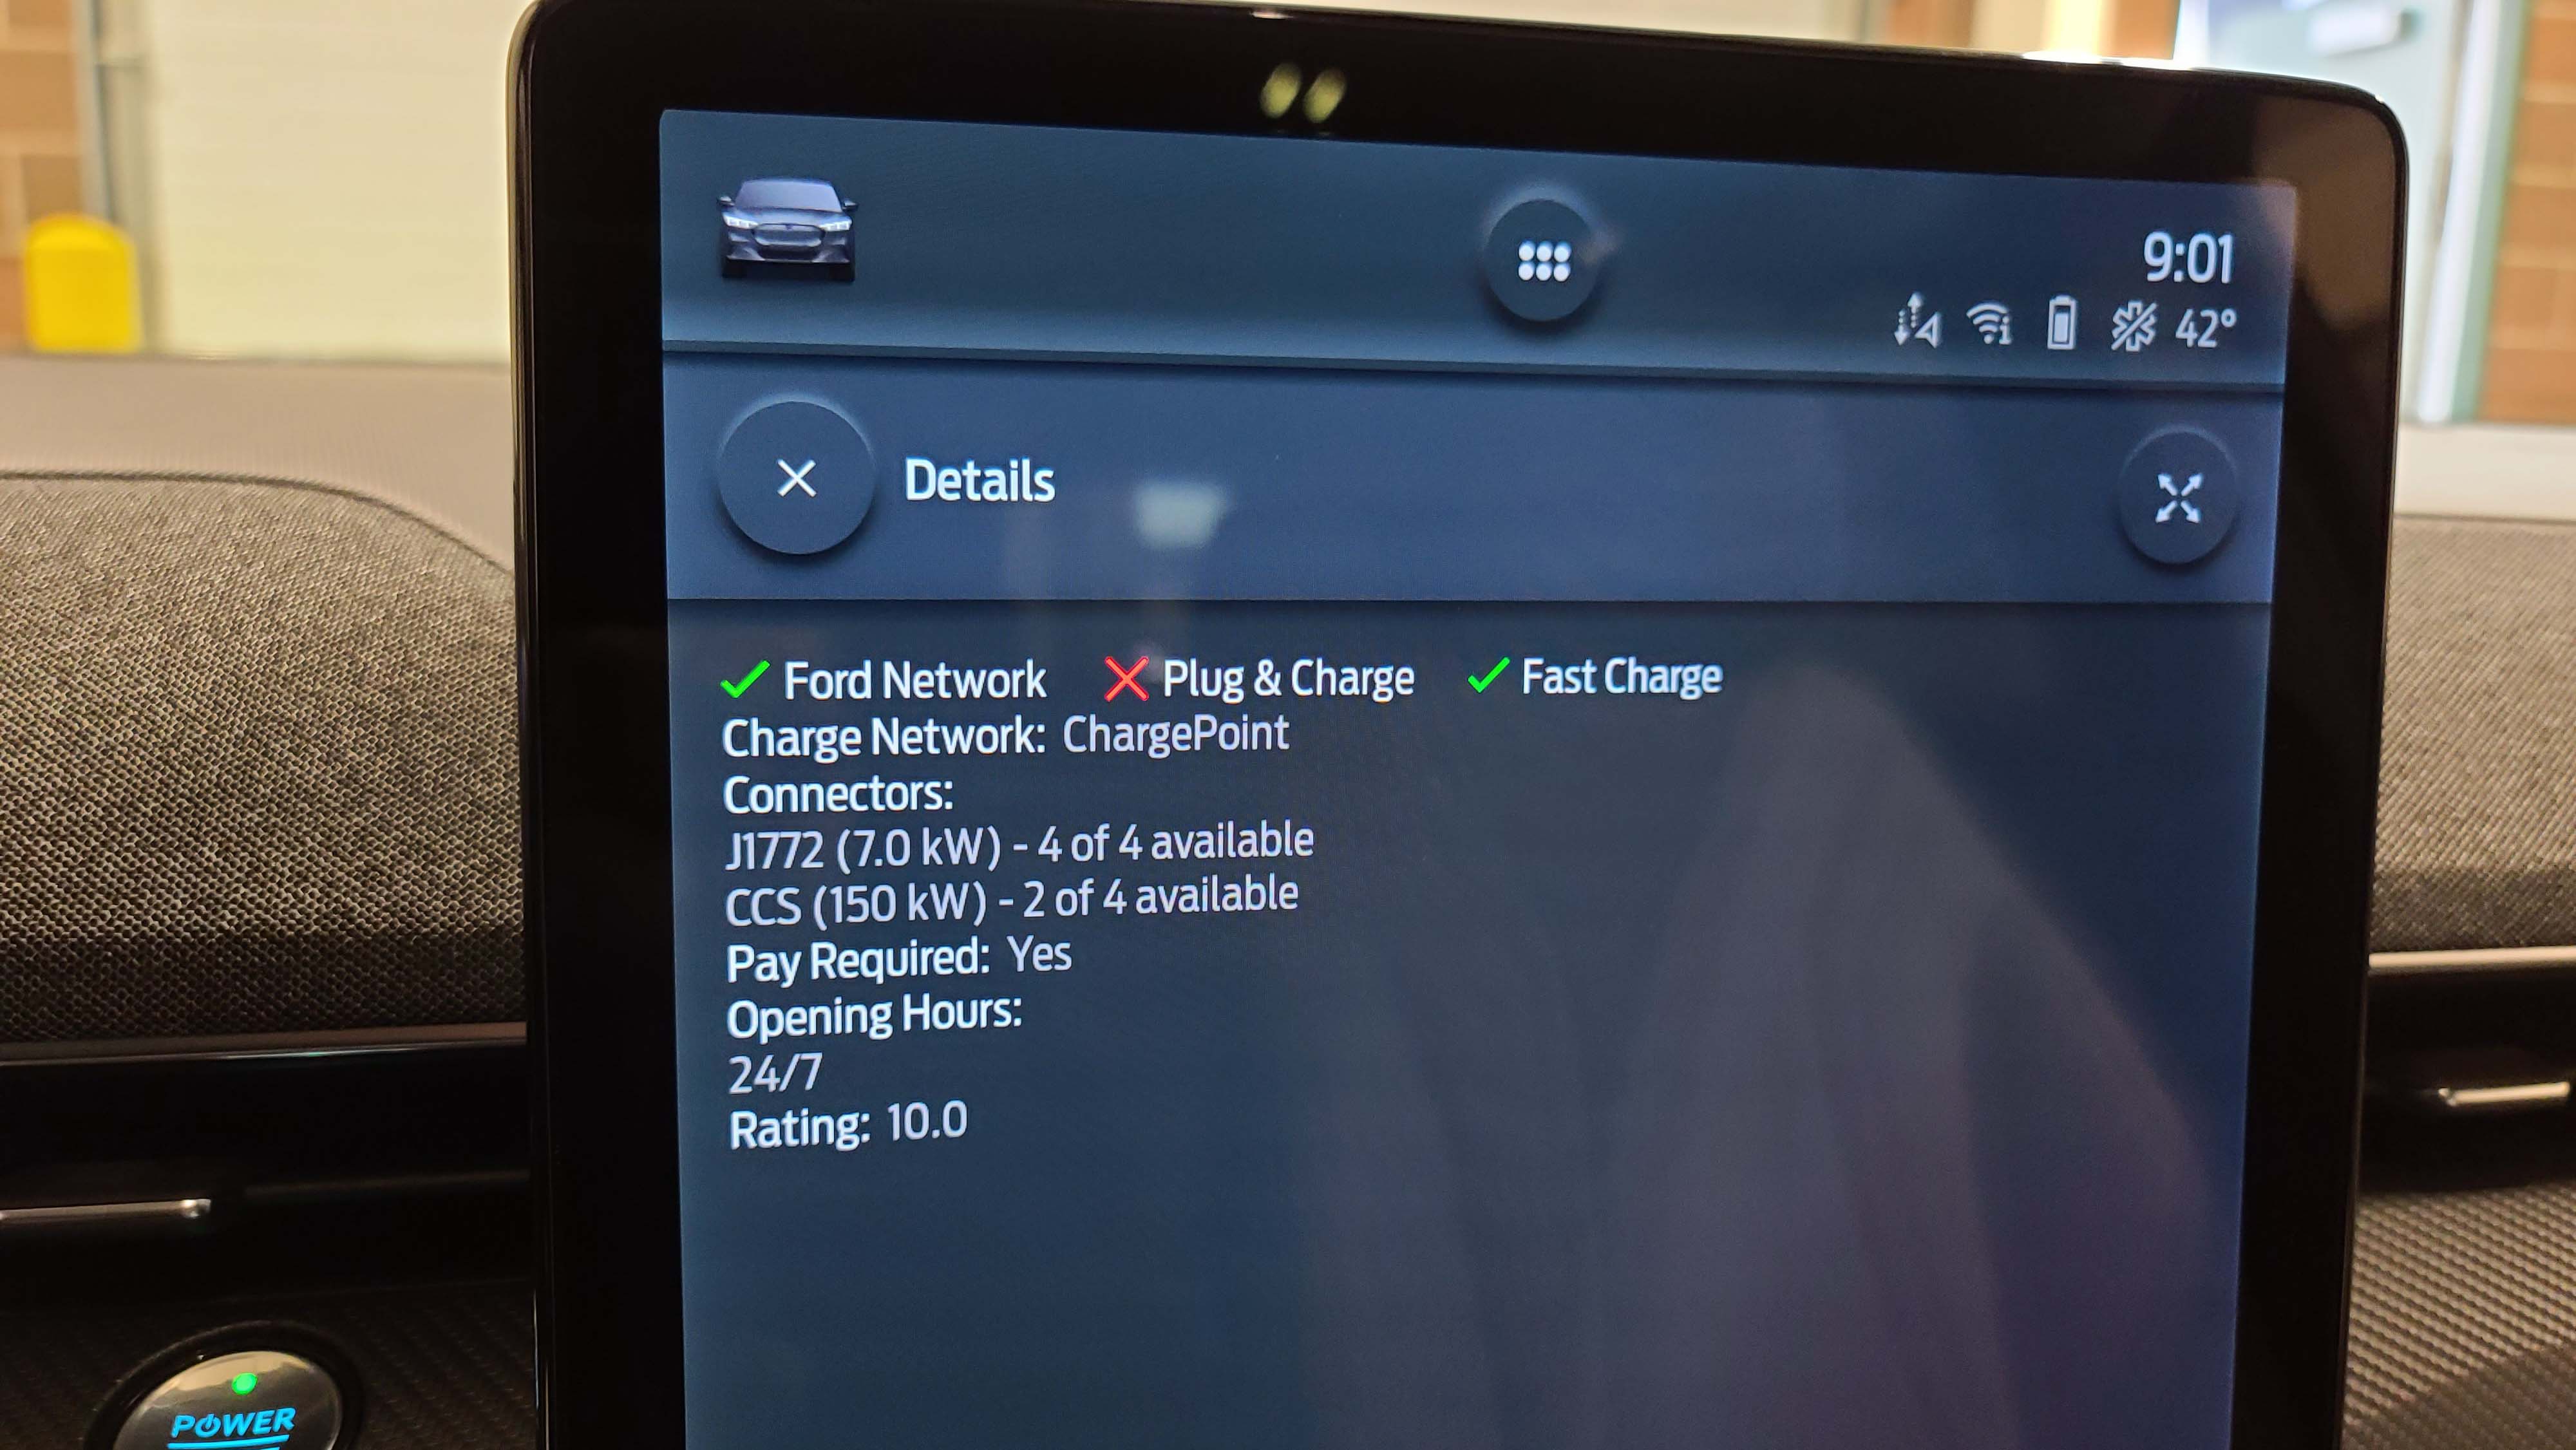 The 2021 Ford Mustang Mach-E does not have a dedicated supercharger network like Tesla. However, it will ID nearby chargers and provide information on their charge capability, fee structure, and available stalls.